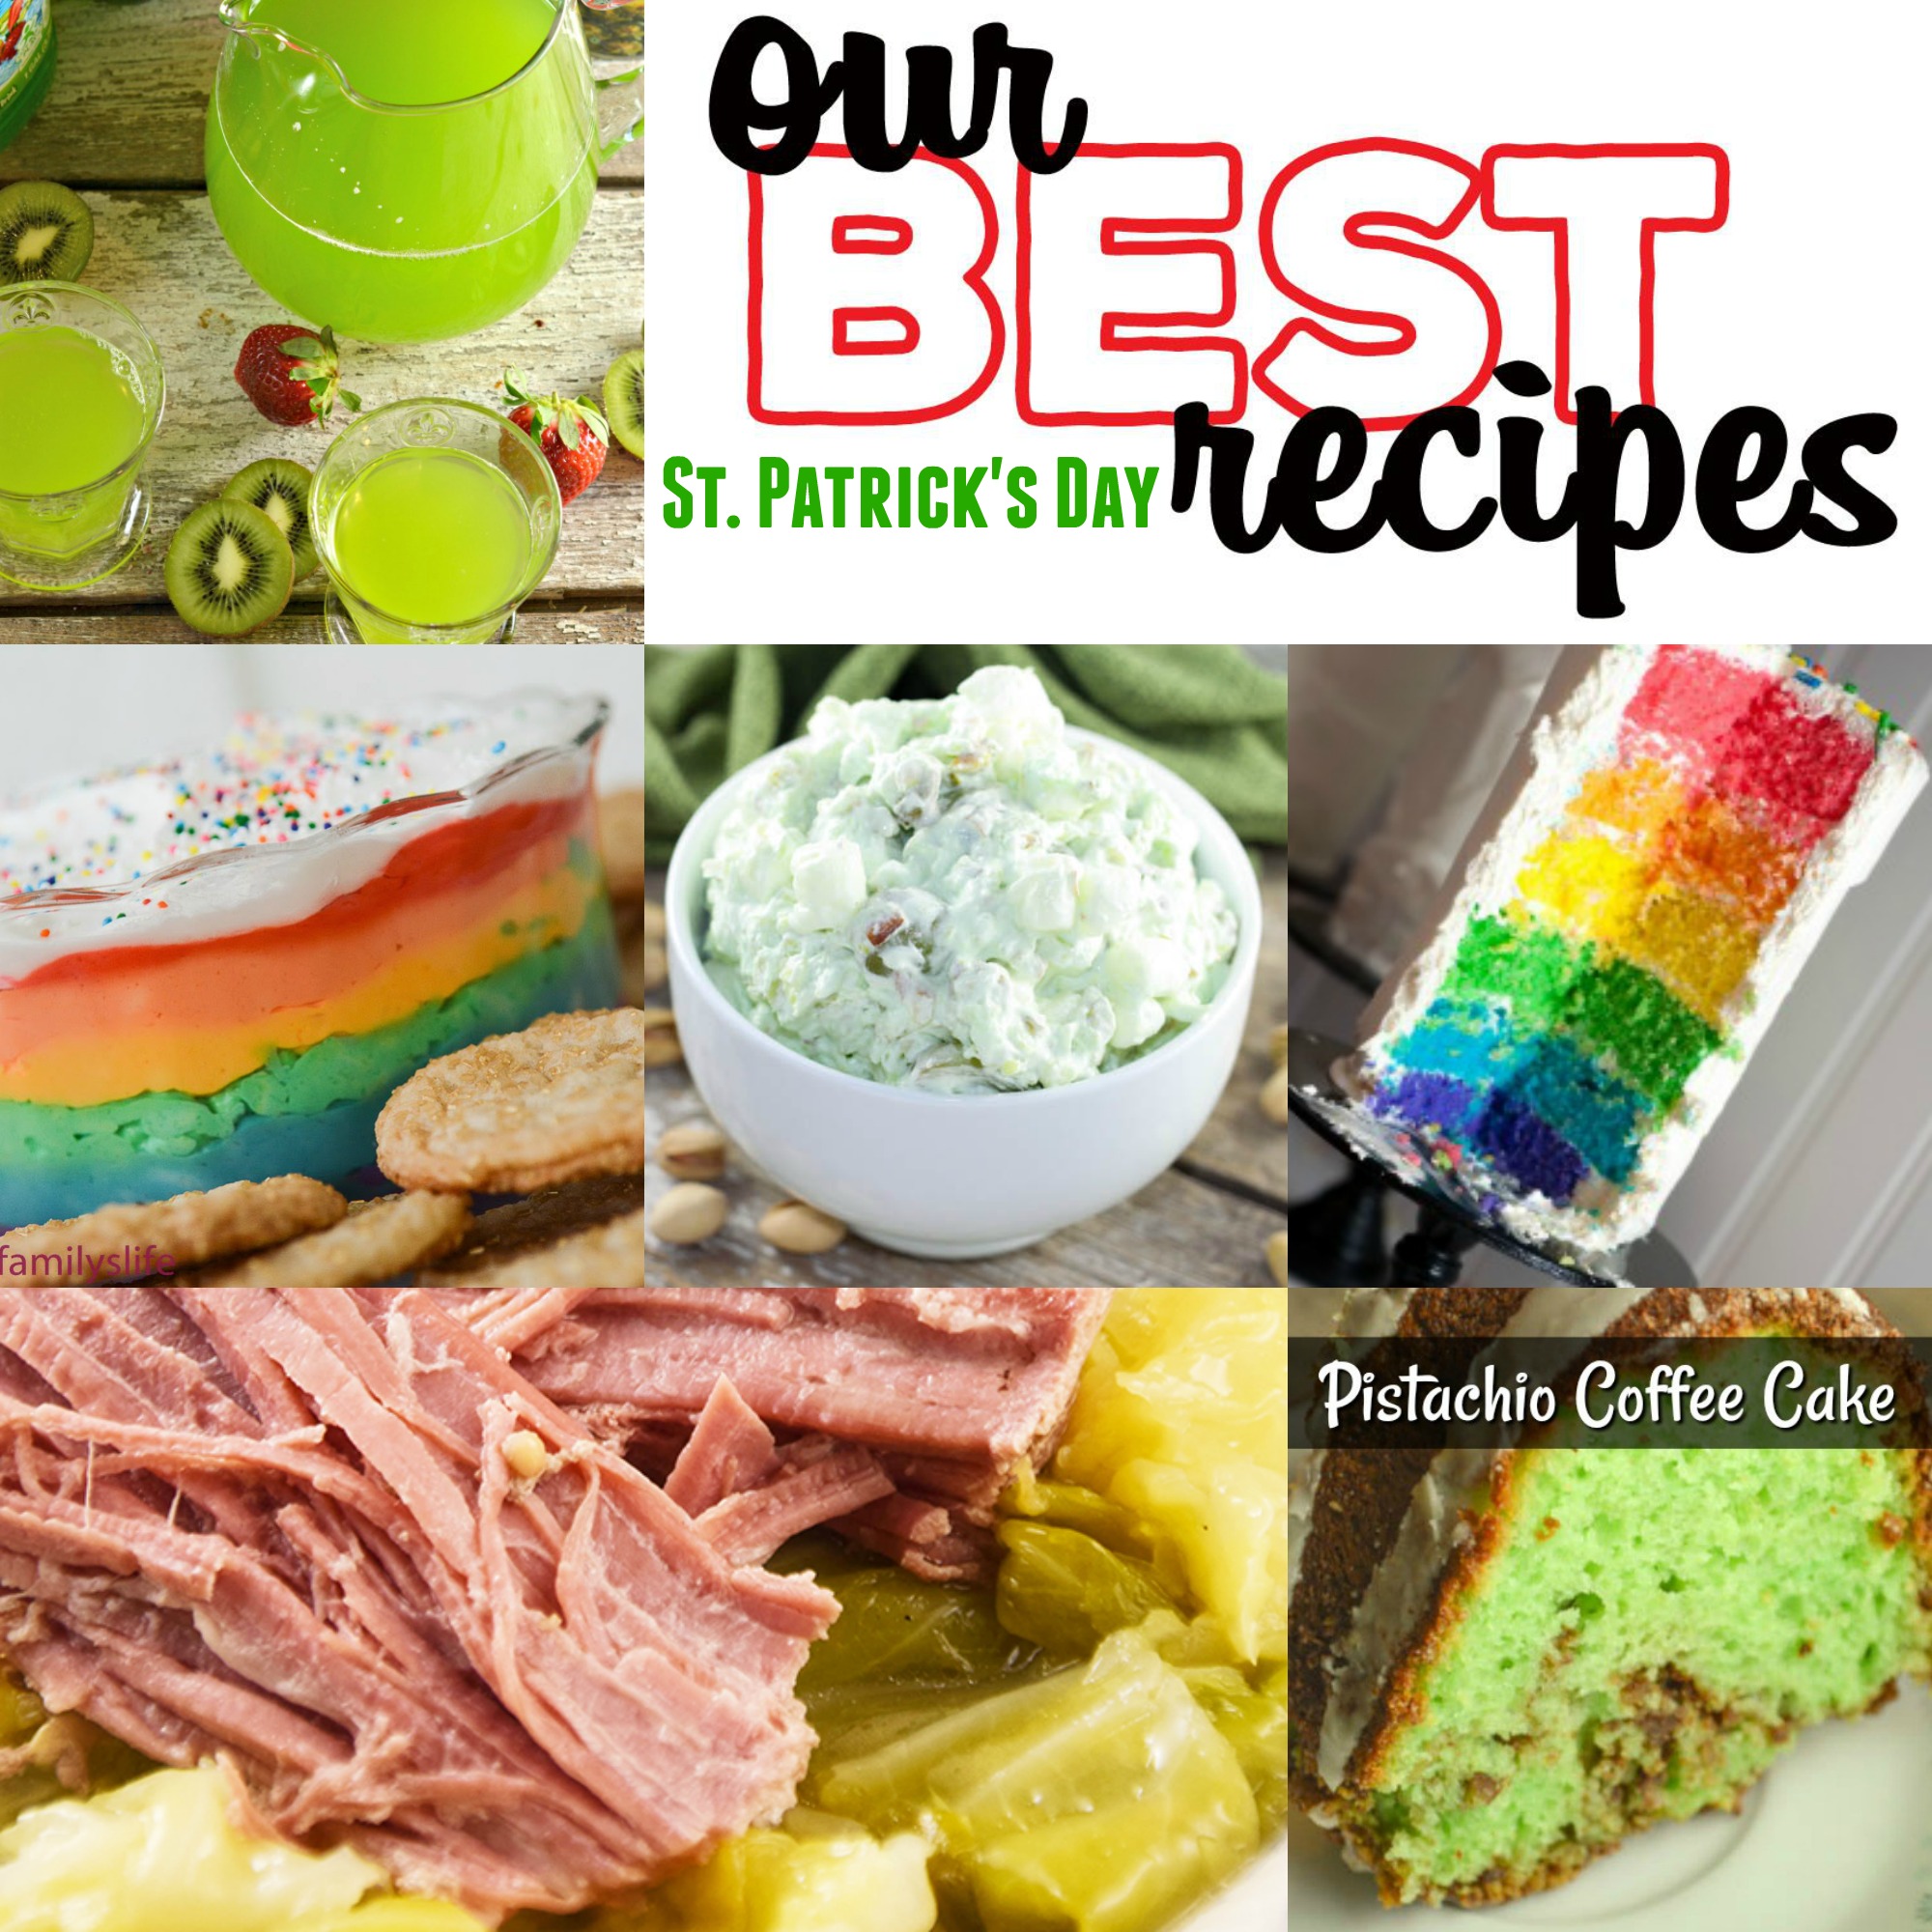 St. Patrick’s Day – Our Best Recipes